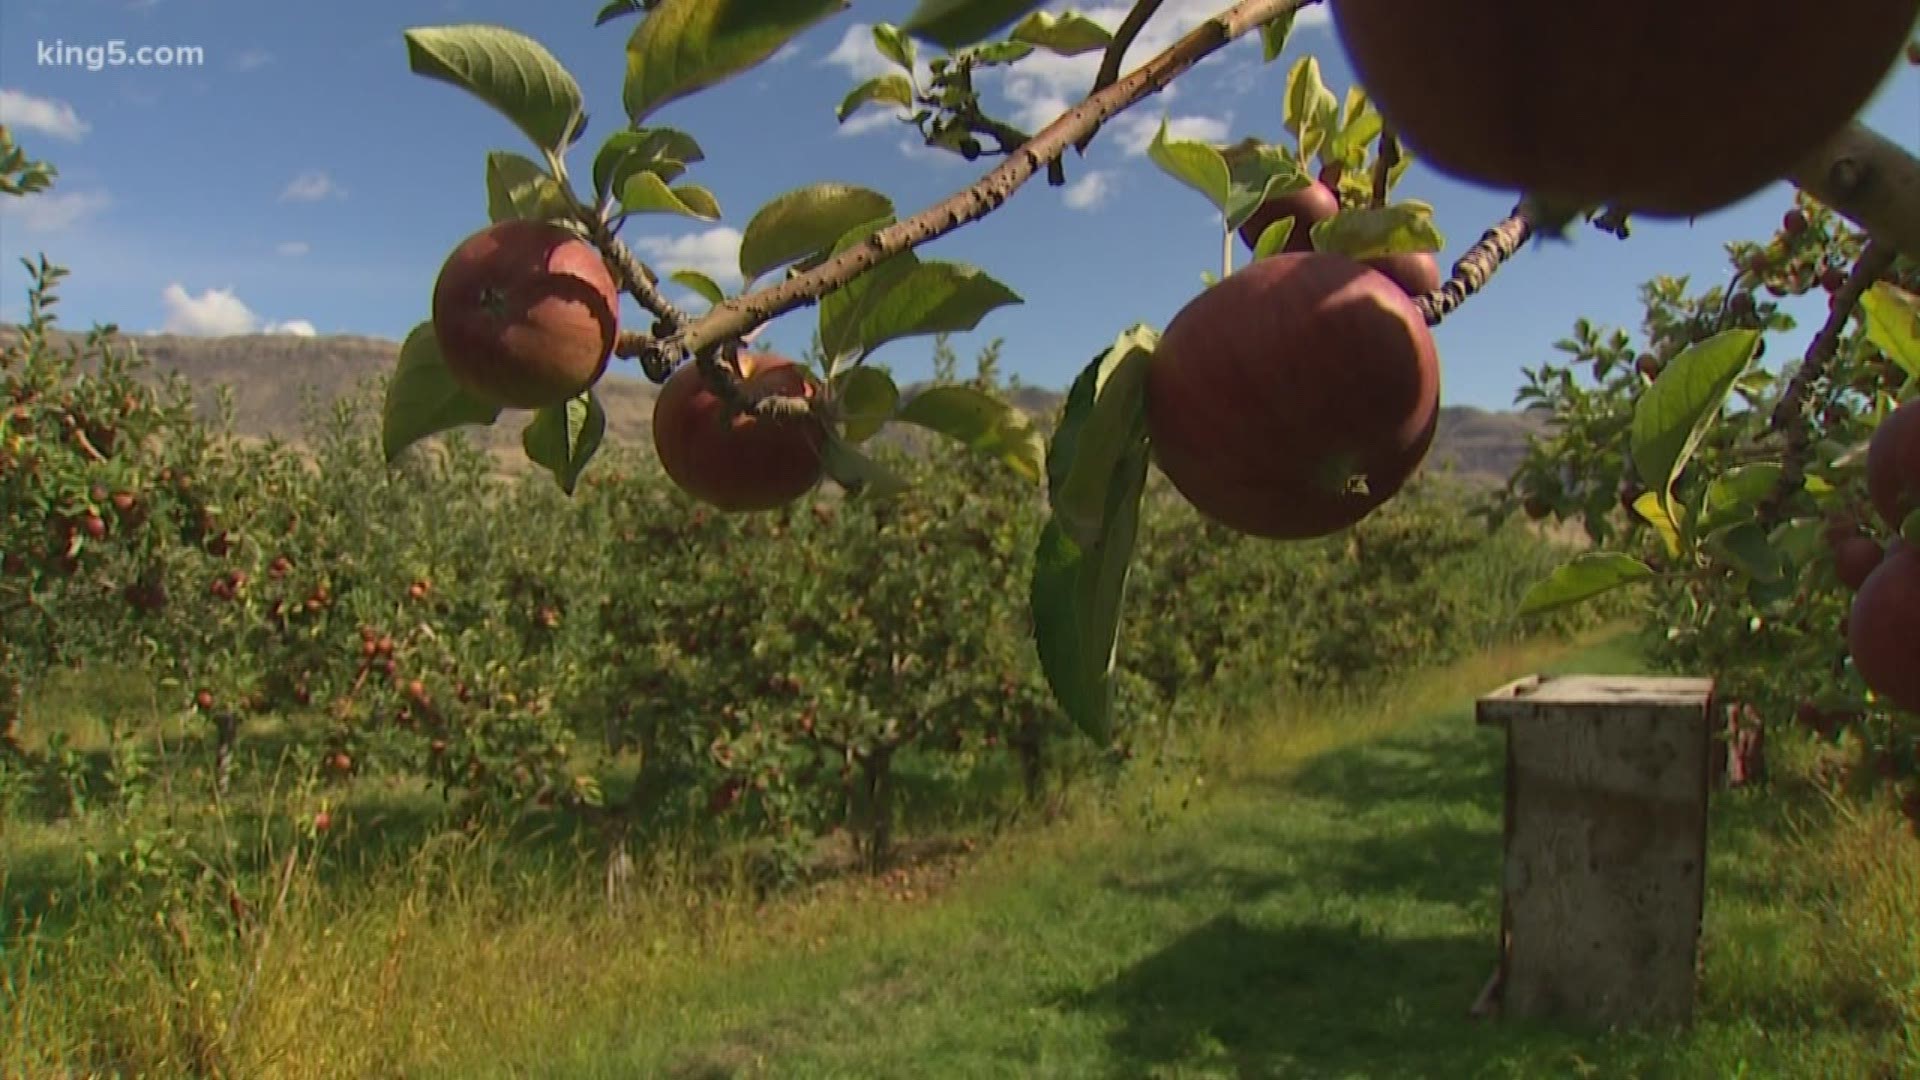 Many apple growers are planting new varieties to entice cider lovers.